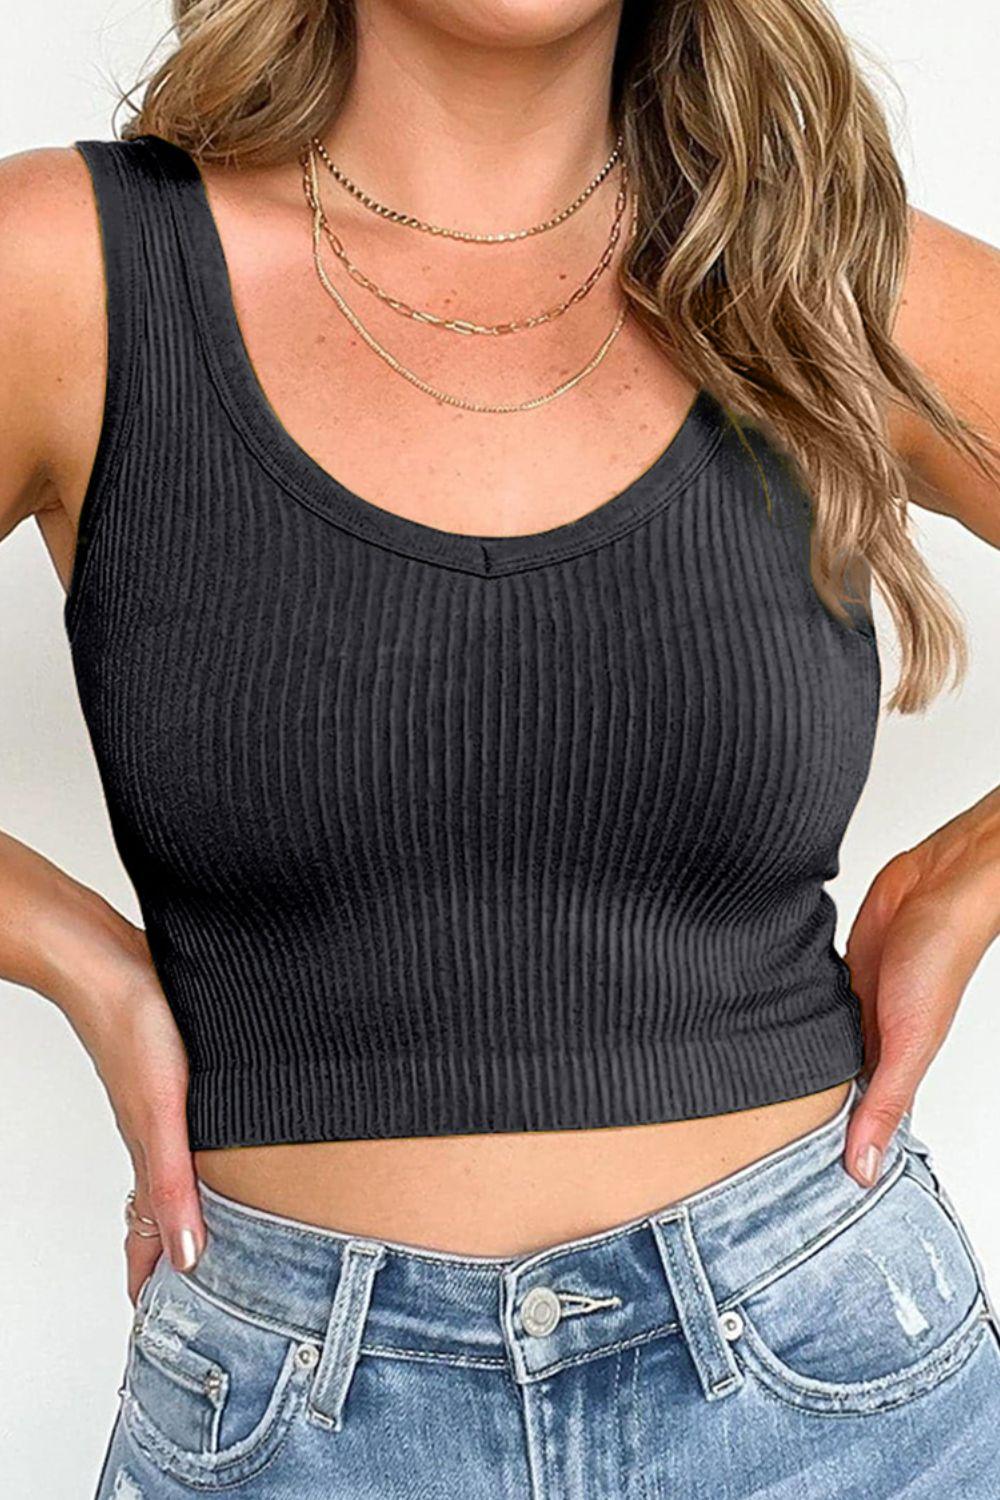 a woman wearing a black tank top and jeans